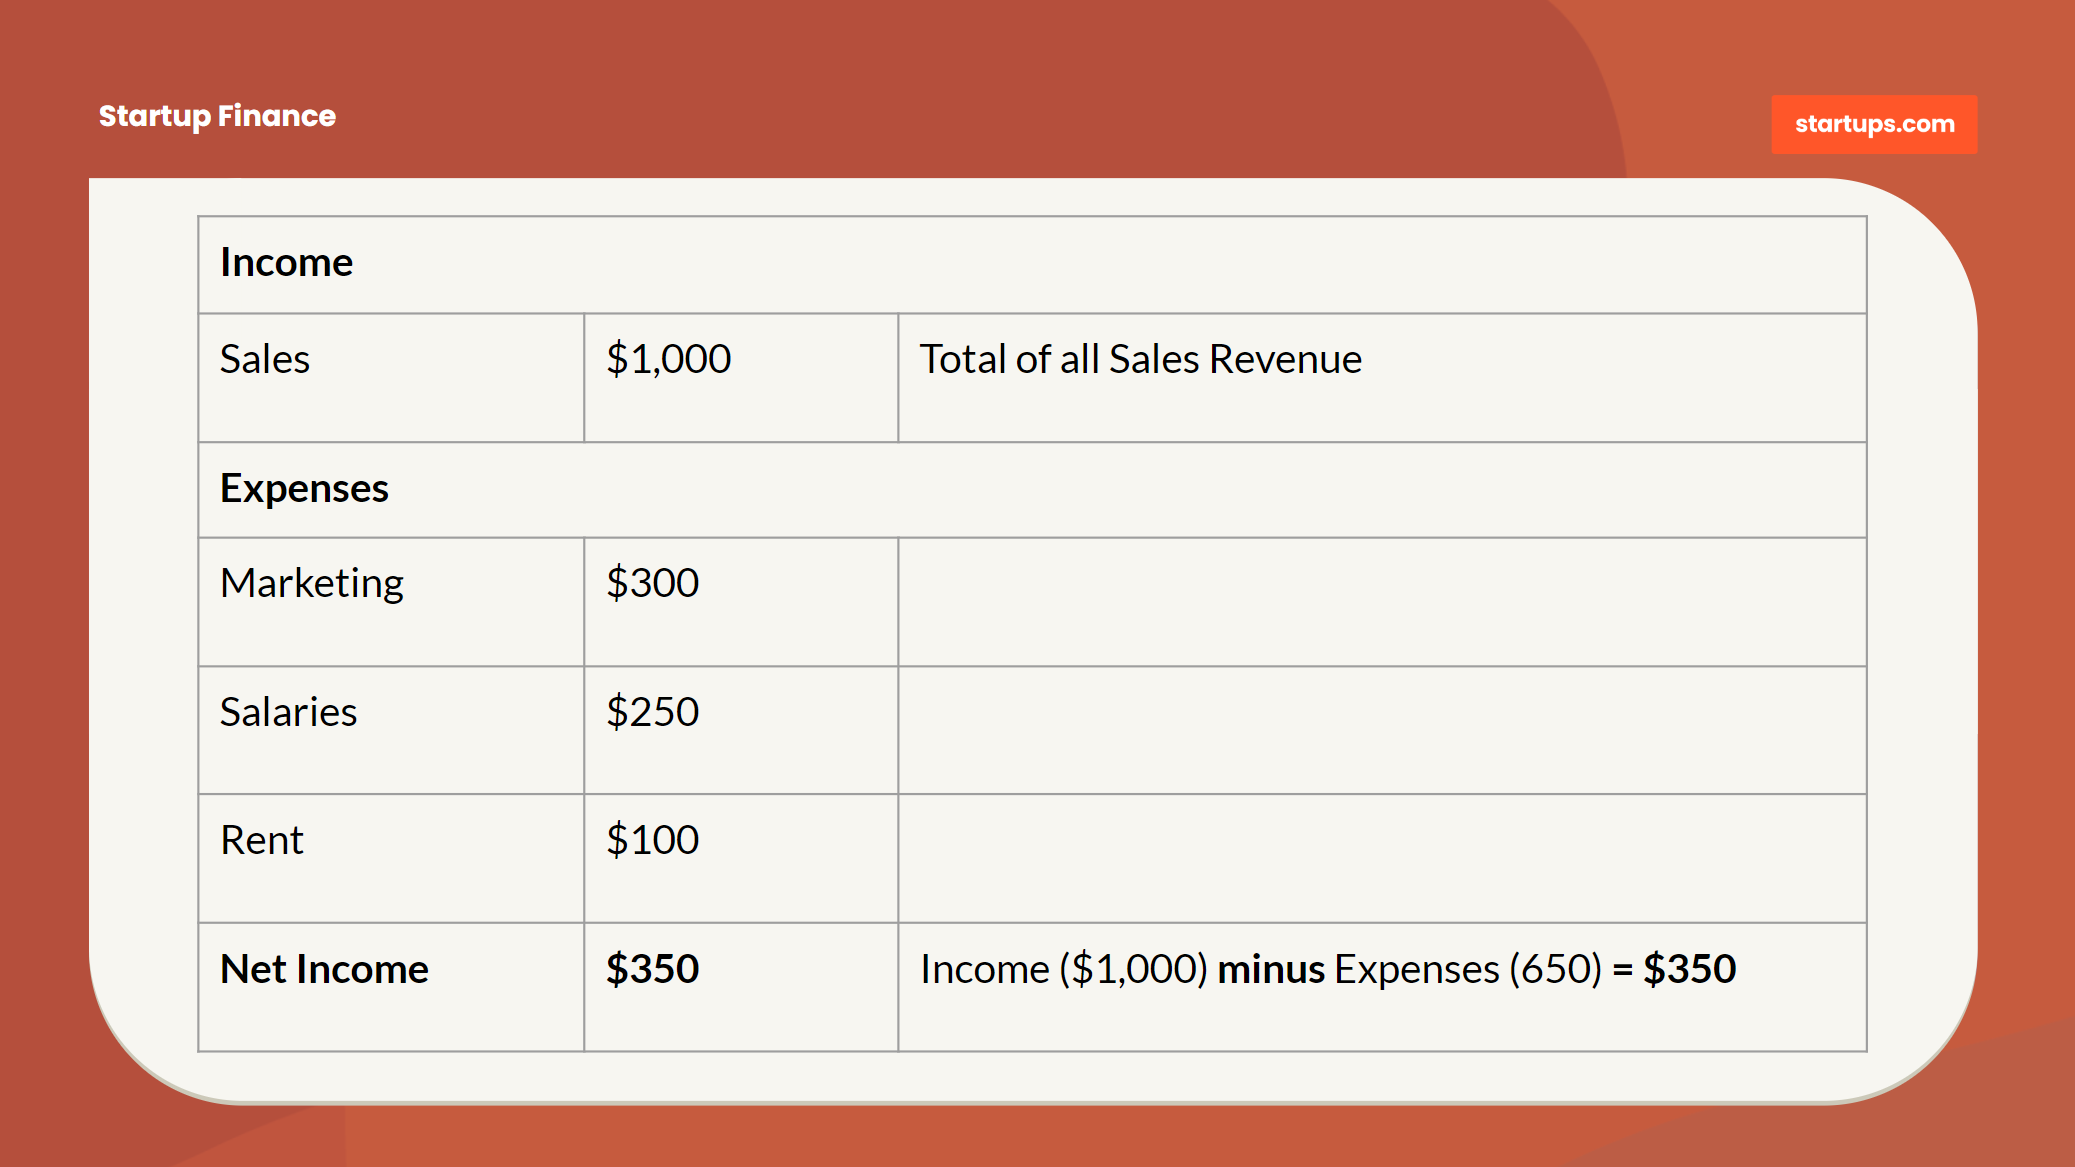 The financial health of our startup isn't based on historical data but more of a balance sheet projection of sorts.